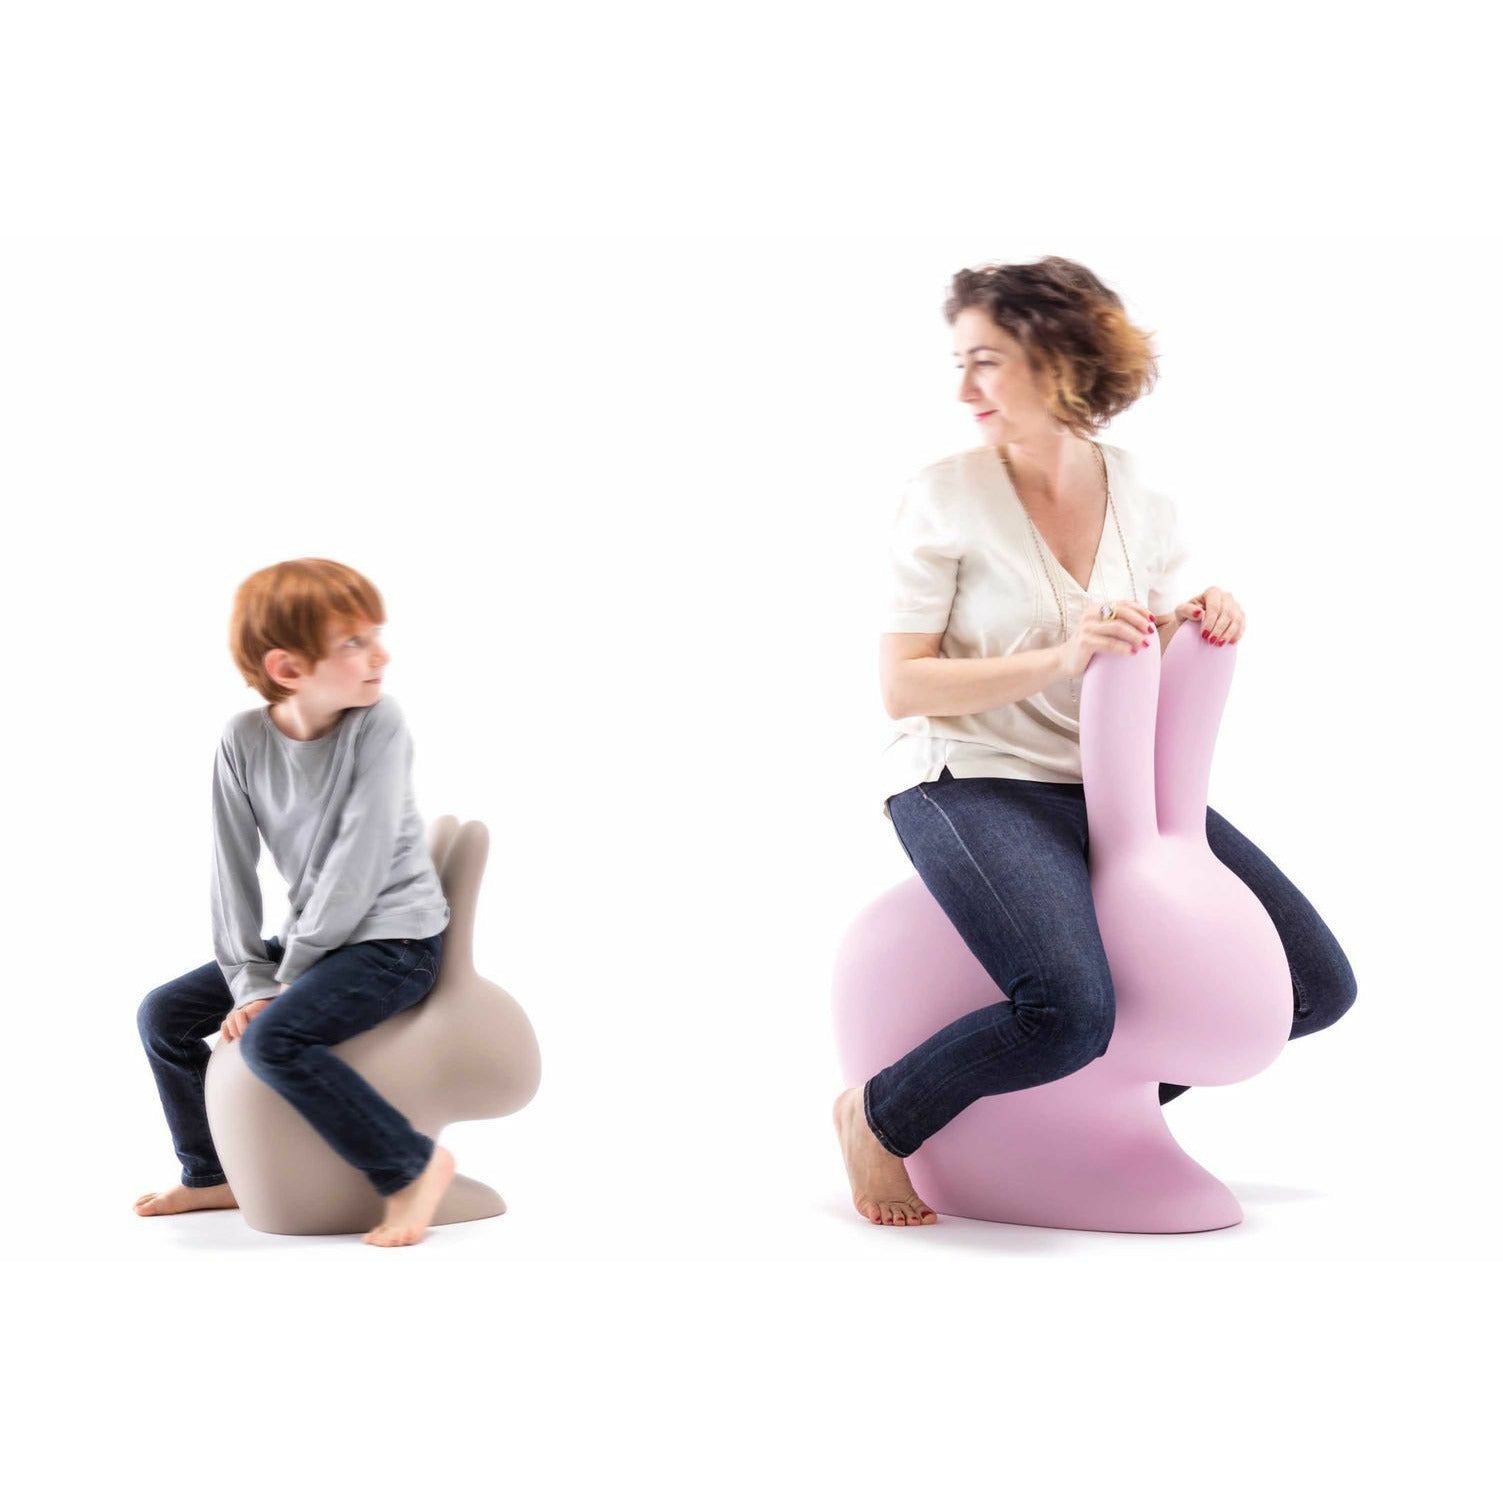 Qeeboo Bunny Chair By Stefano Giovannoni, Pink